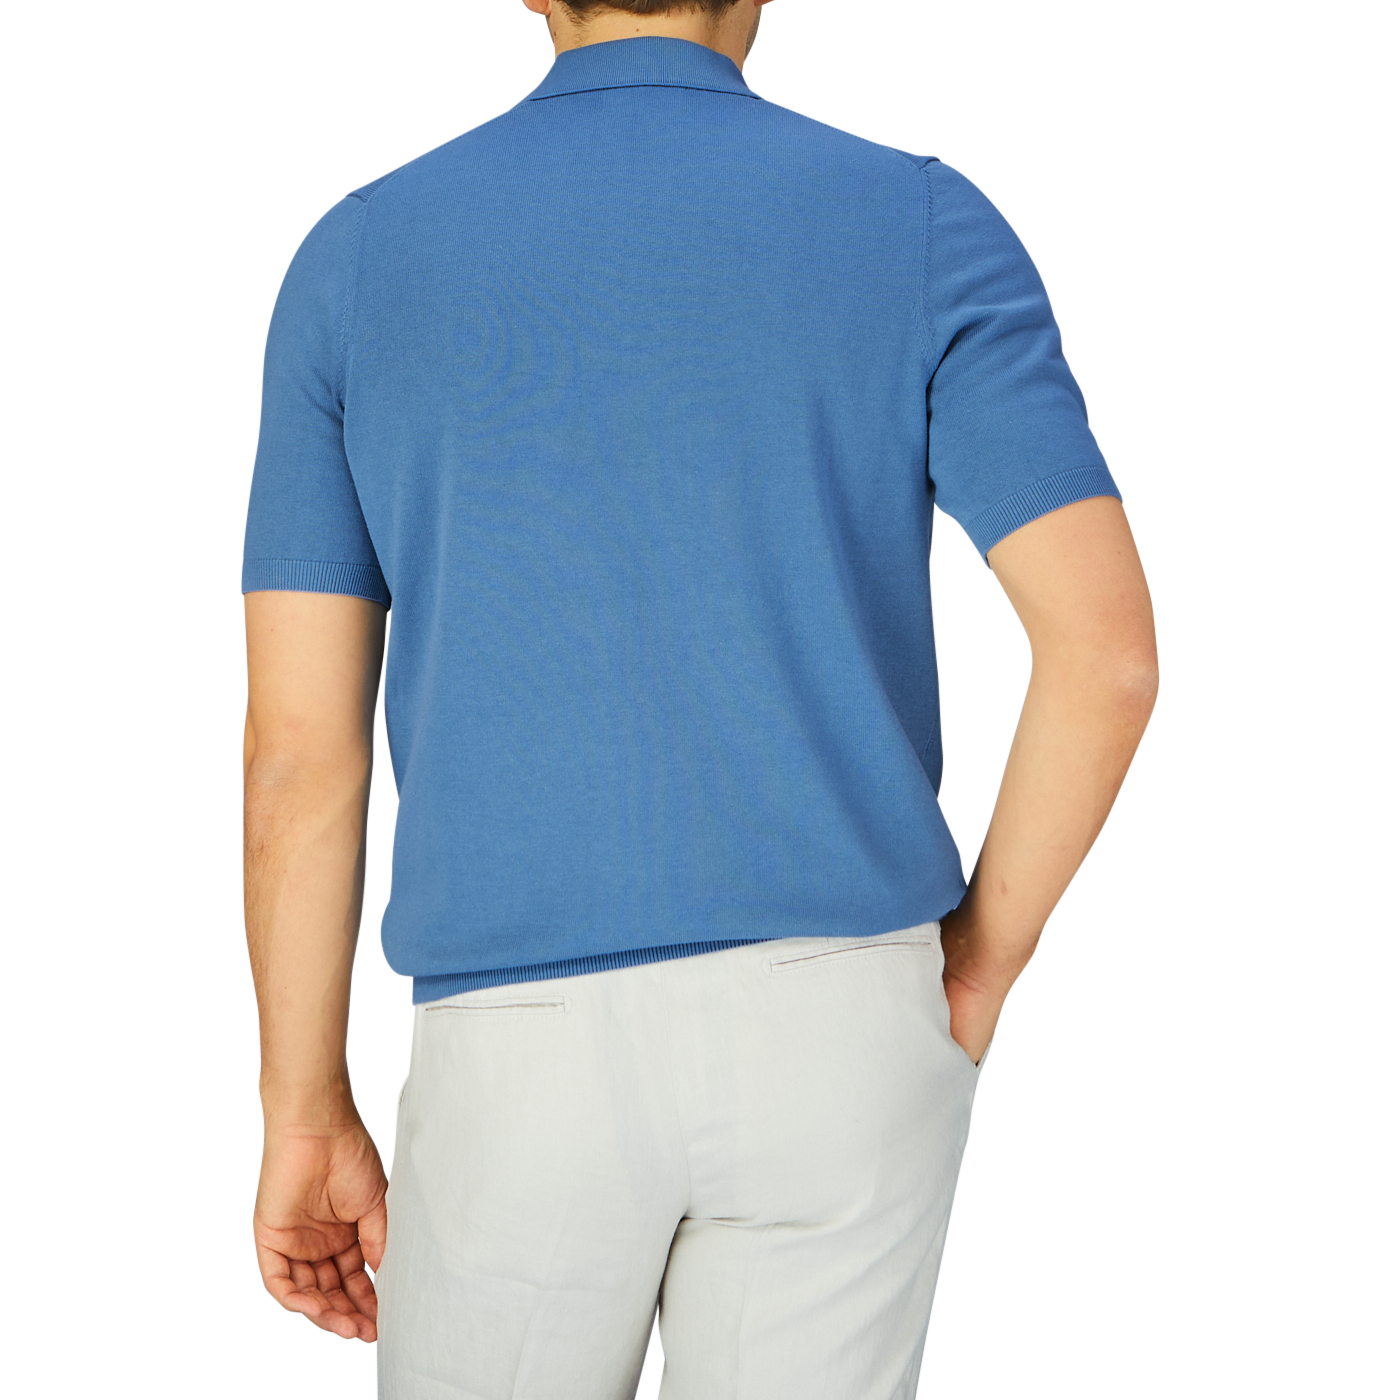 Man wearing an Alan Paine airforce blue knitted cotton polo shirt and white pants, viewed from the back.